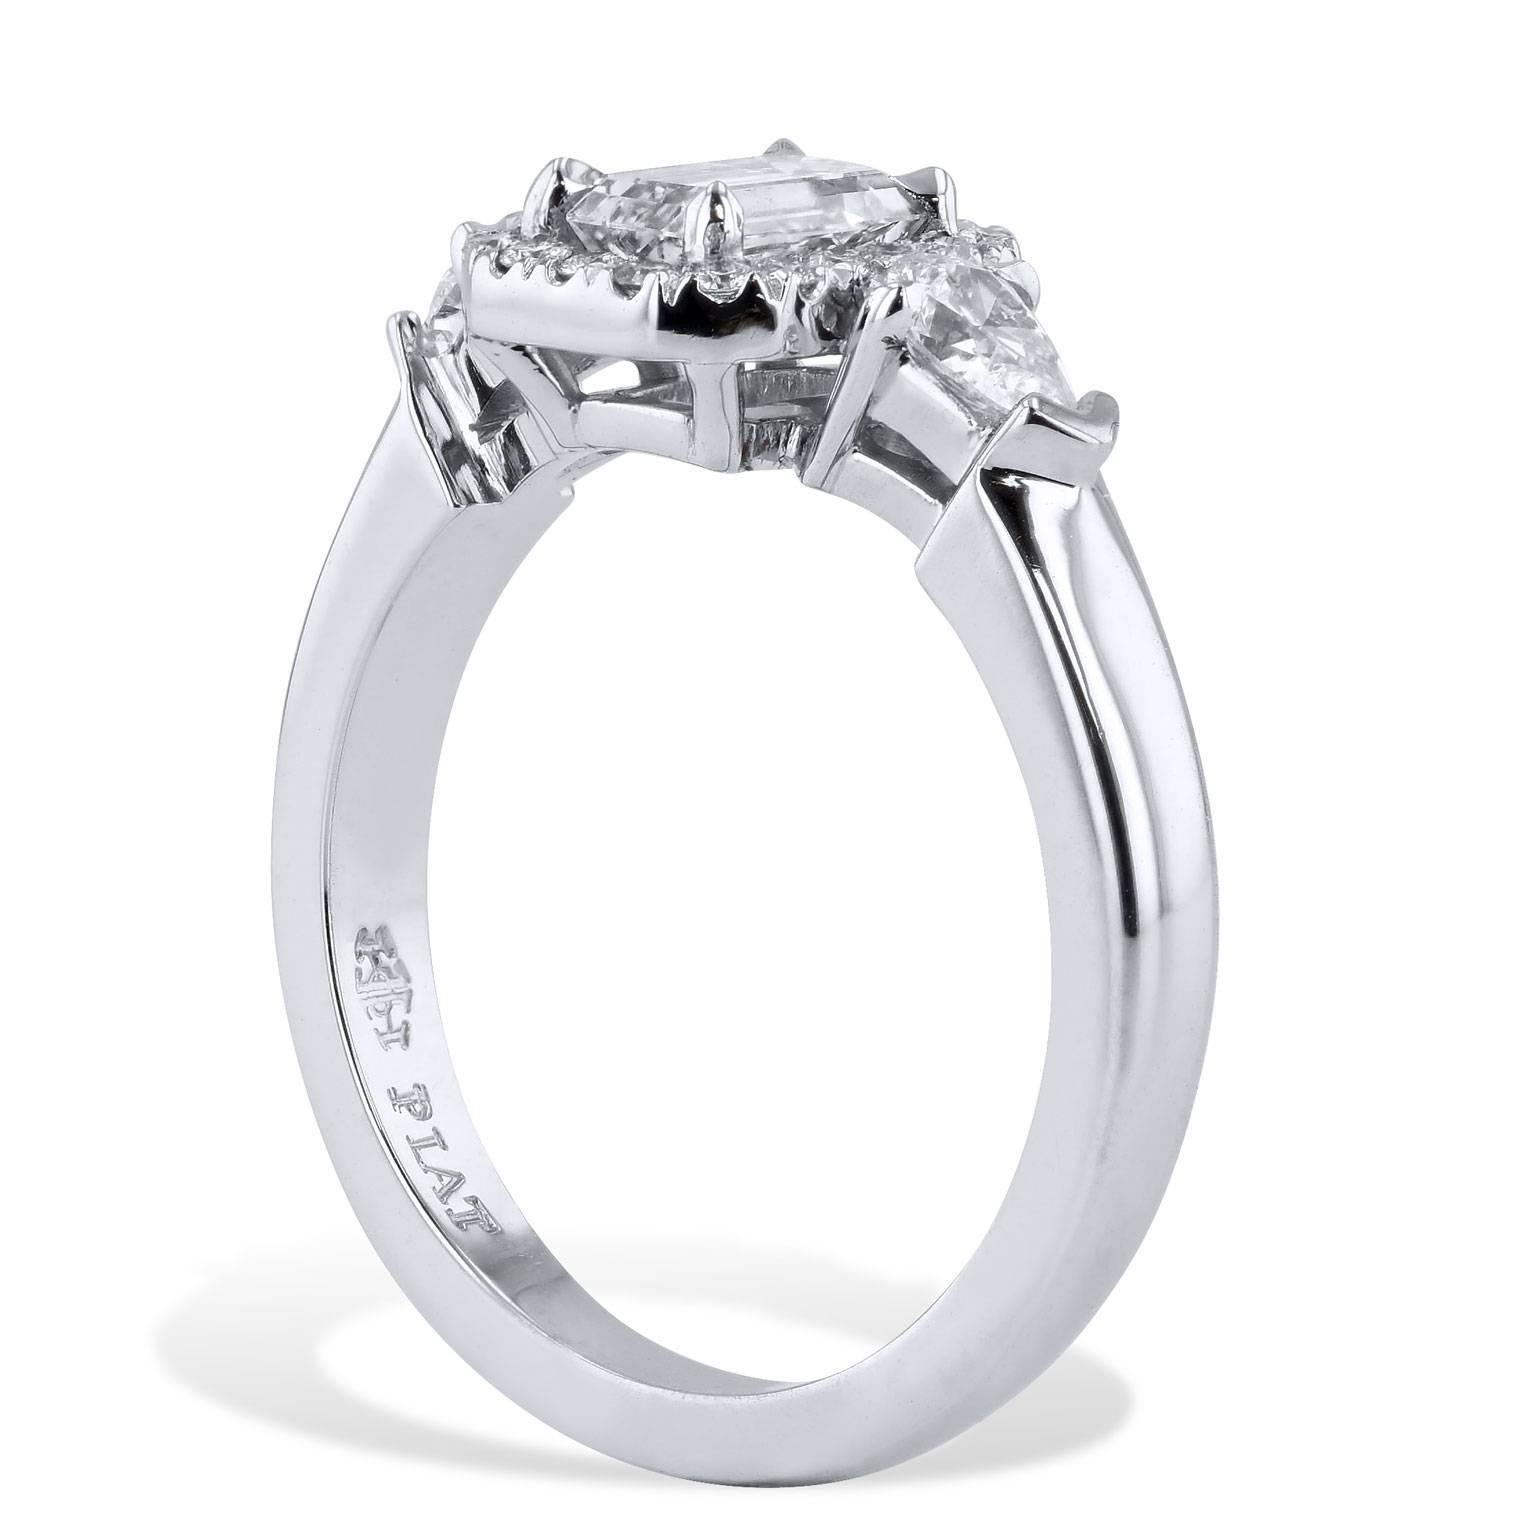 GIA Certified .62 Carat Emerald Cut Diamond & Platinum Engagement Ring Size 5.25

A platinum engagement ring that peers right into one's soul. A 0.62 carat emerald cut diamond prong-set at center (E/VS2; GIA# 6147756366) focuses one's gaze, while